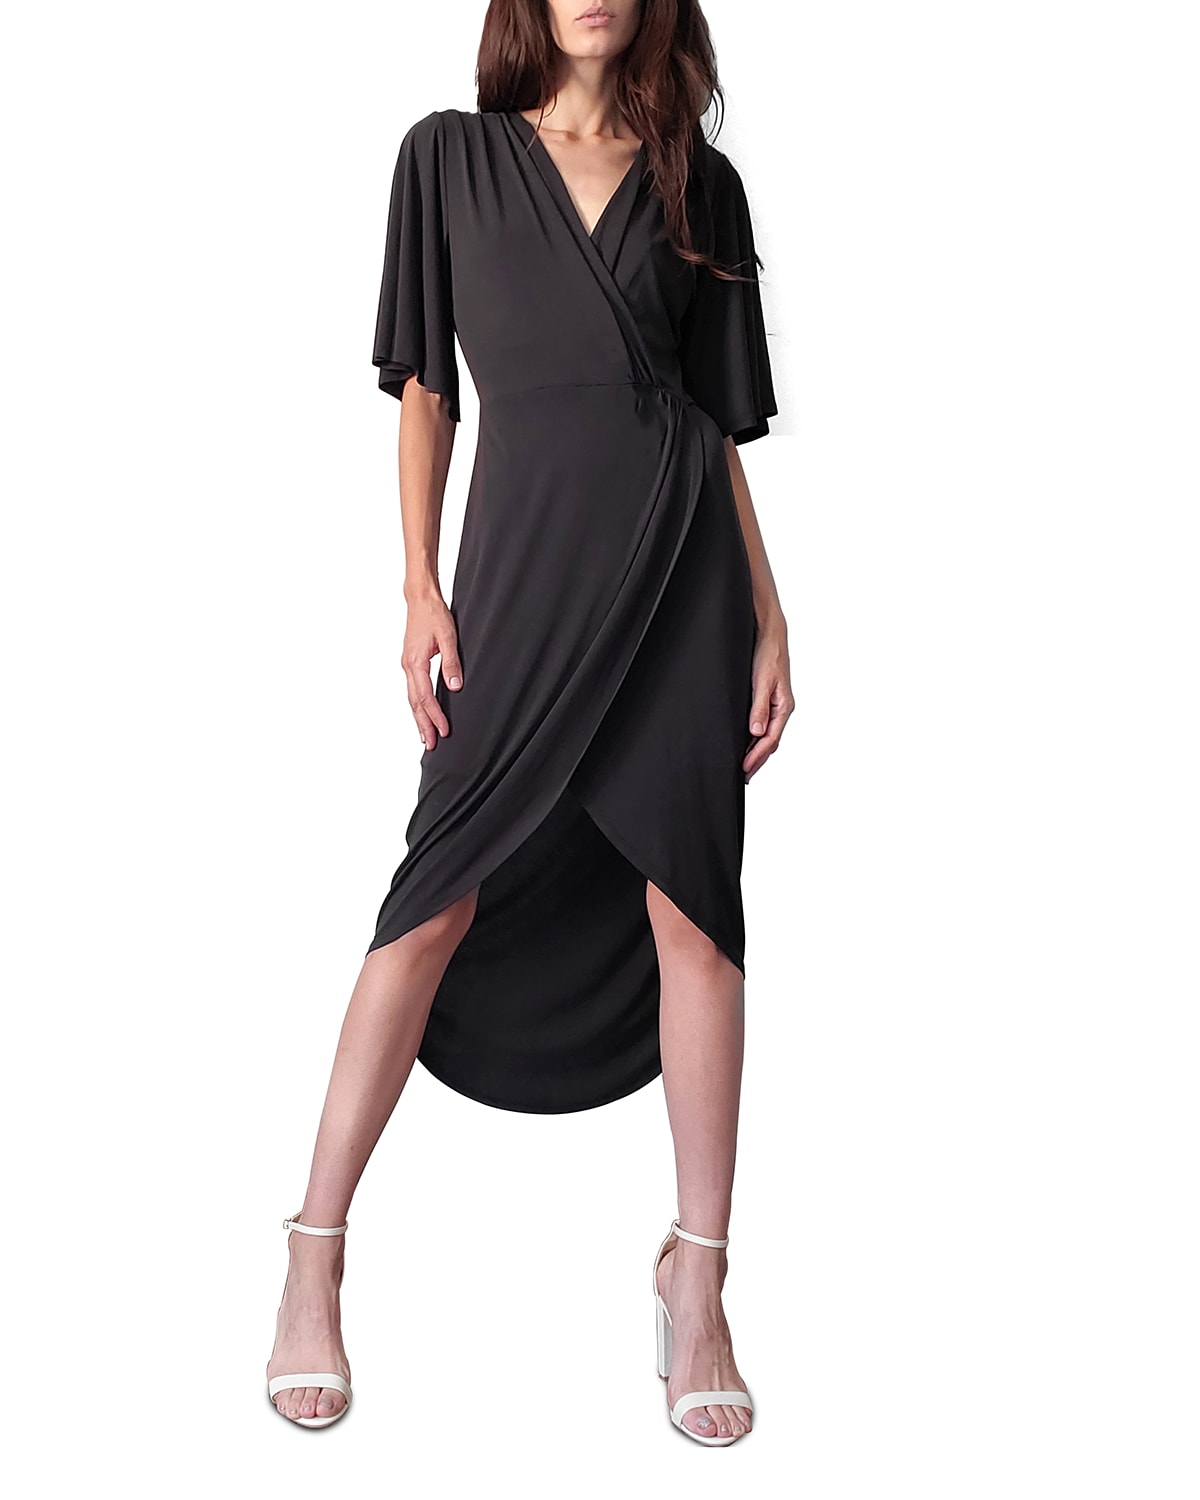 LBLC THE LABEL Courtney Gathered High-Low Dress